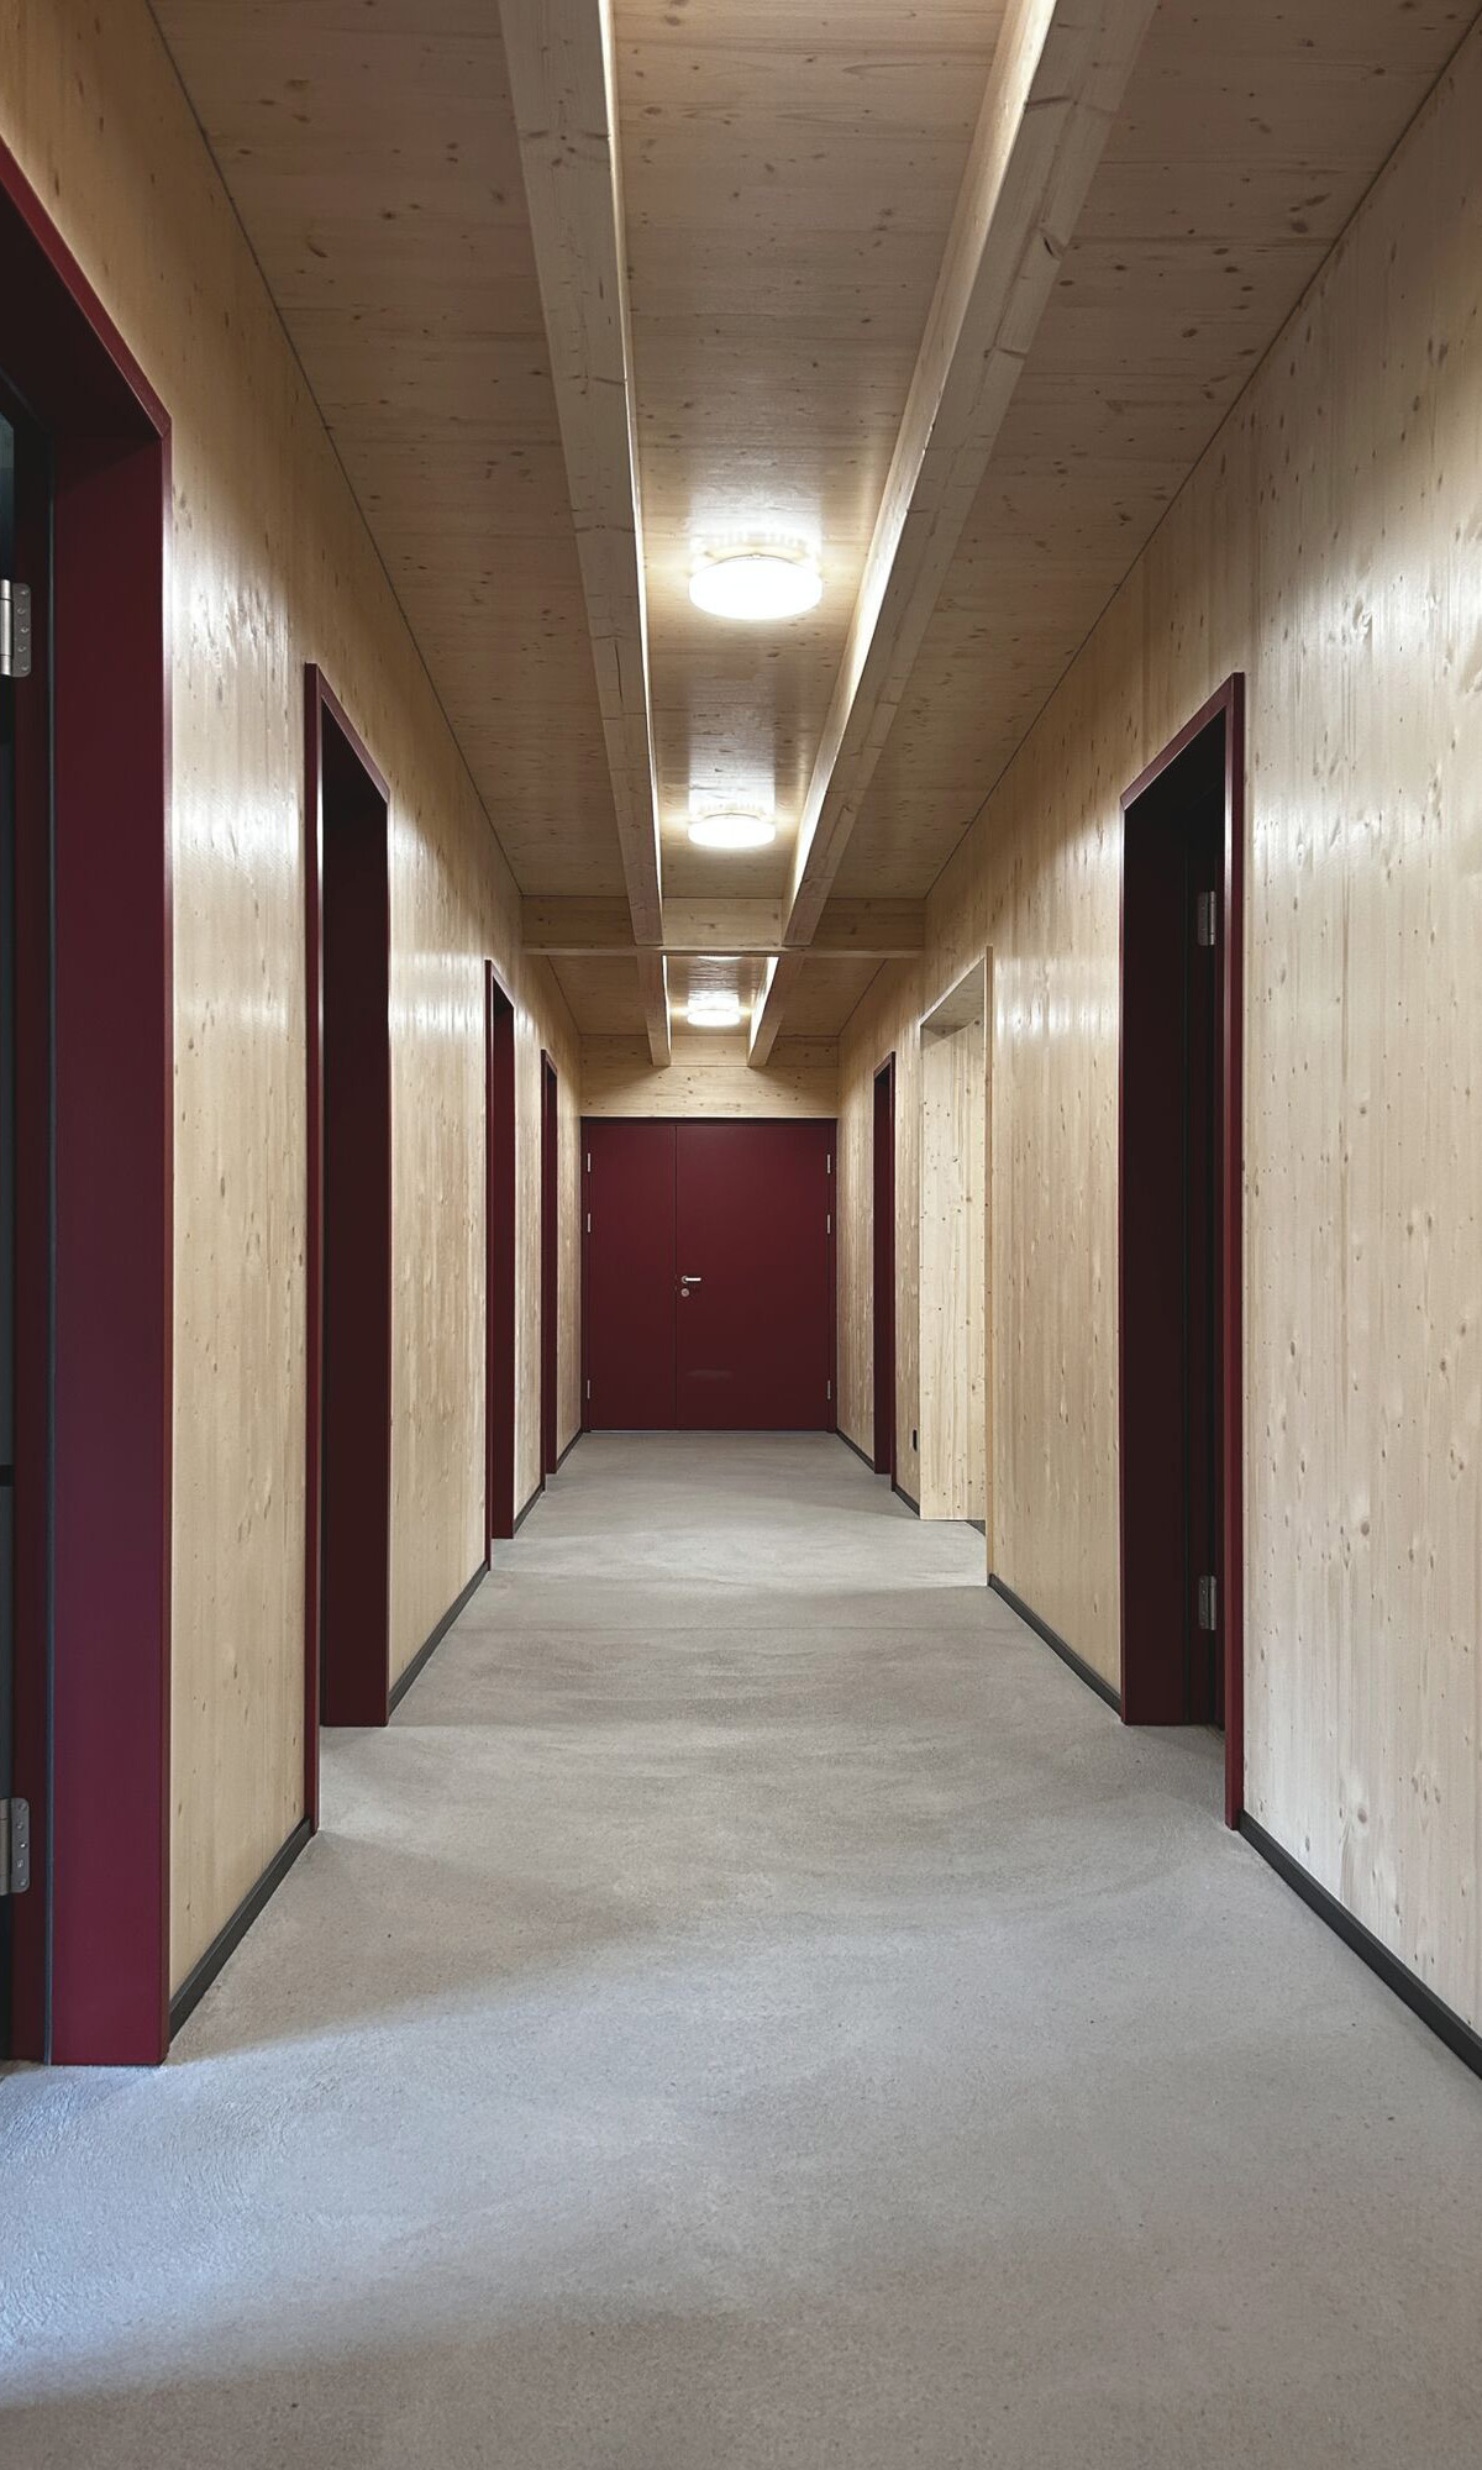 View into the corridor of the new building for the scouts